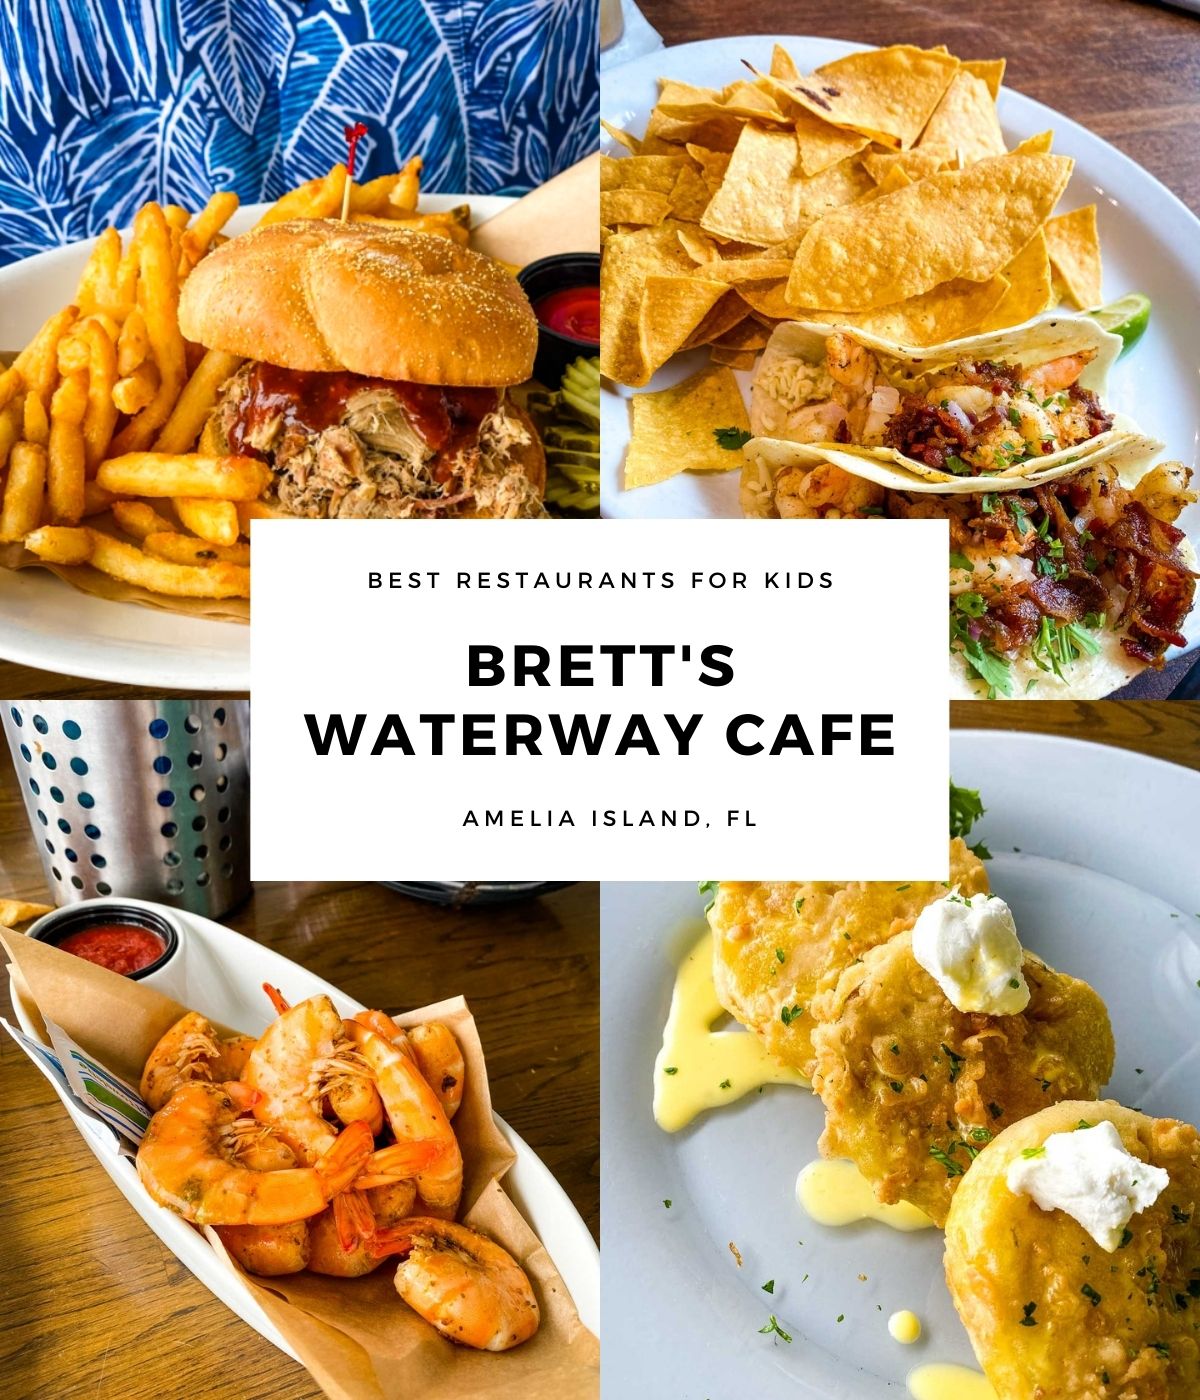 A photo collage shows many of the foods available at Brett's Waterway Cafe in Amelia Island.